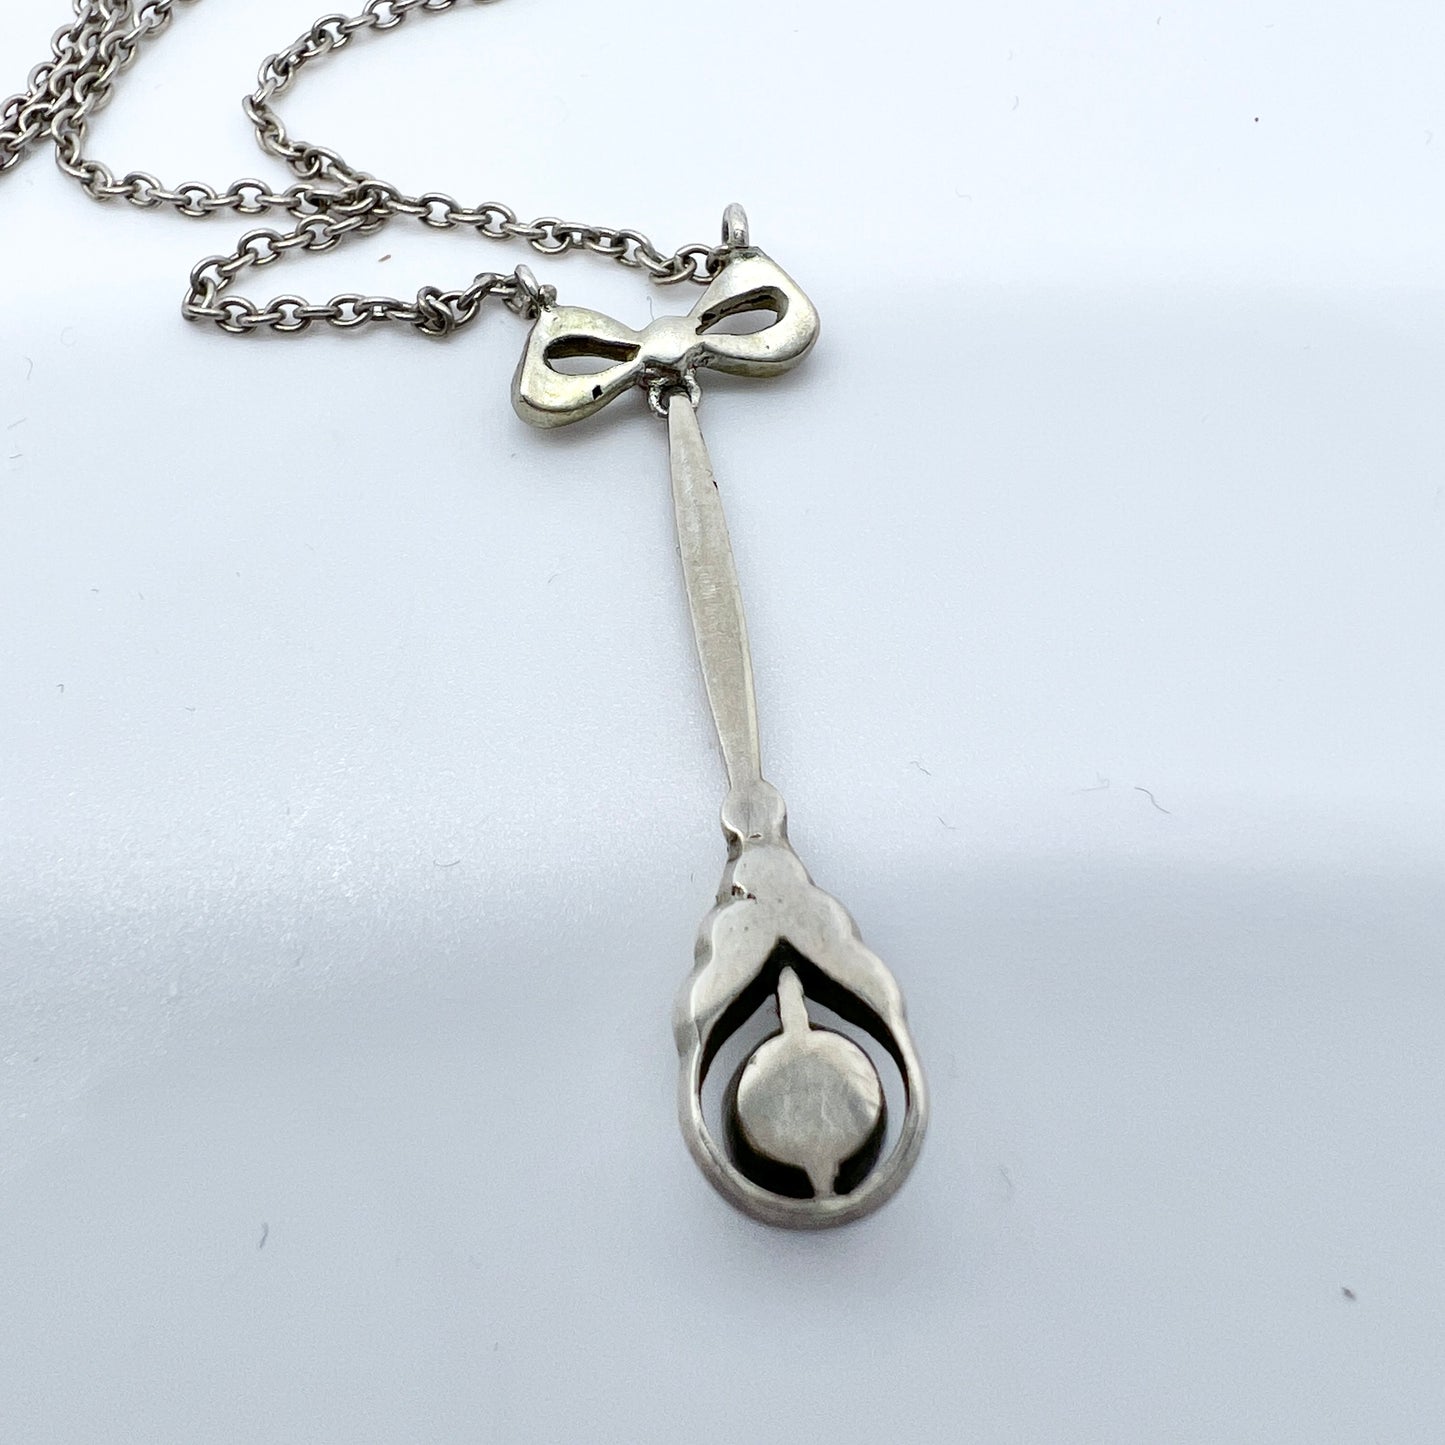 Antique Early 1900s. Solid Silver Paste Stone Pendant Necklace.